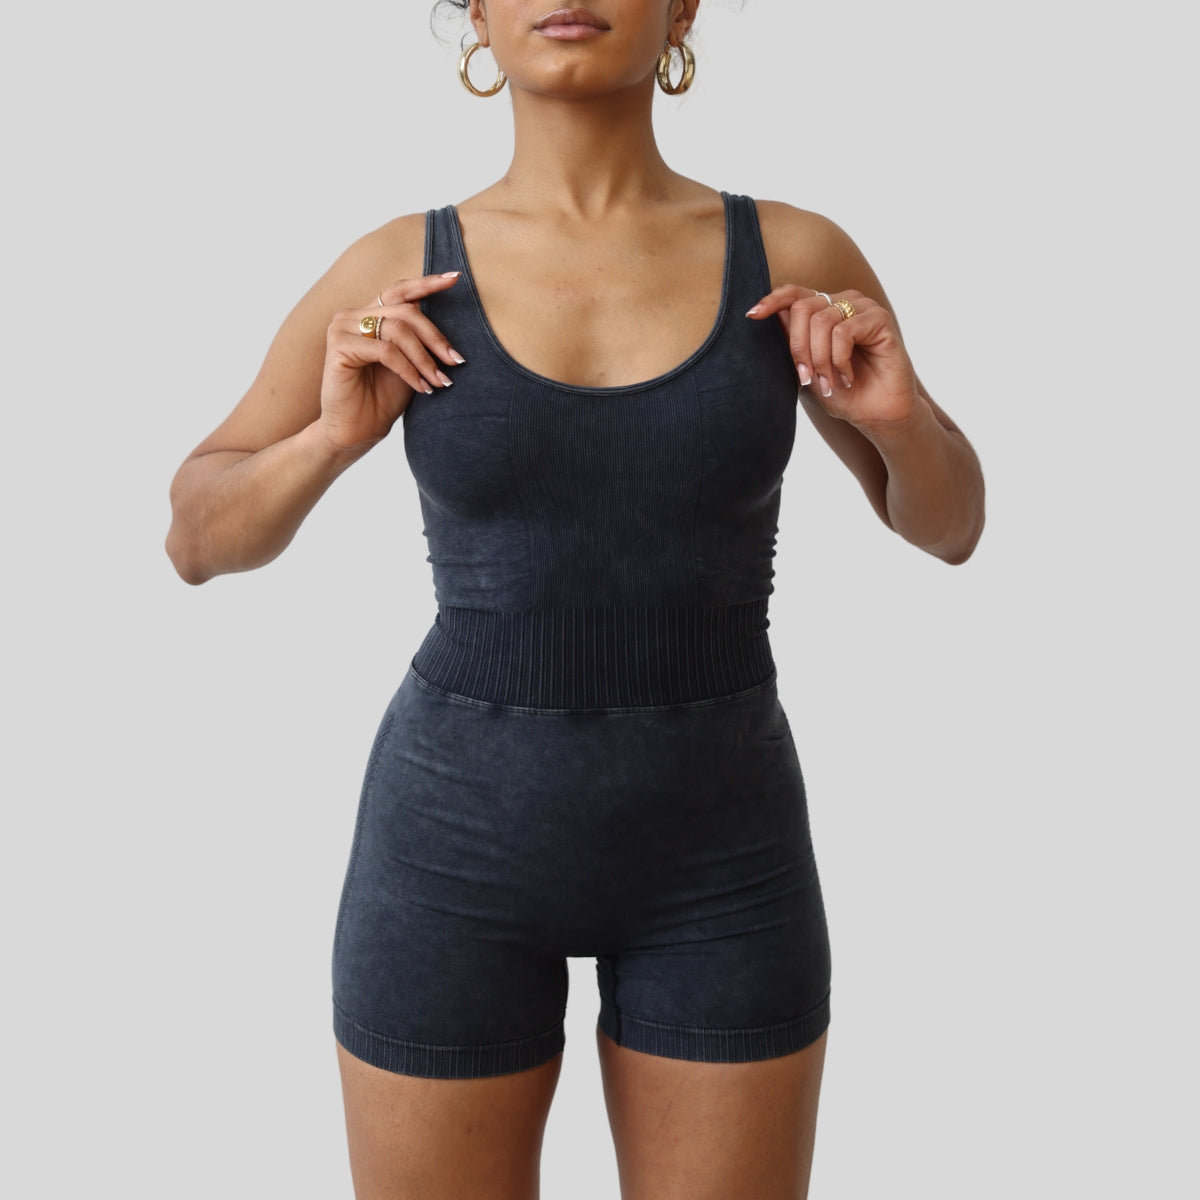 Oxymoron - #bodysuit and #Seamless #shorts from Oxymoron